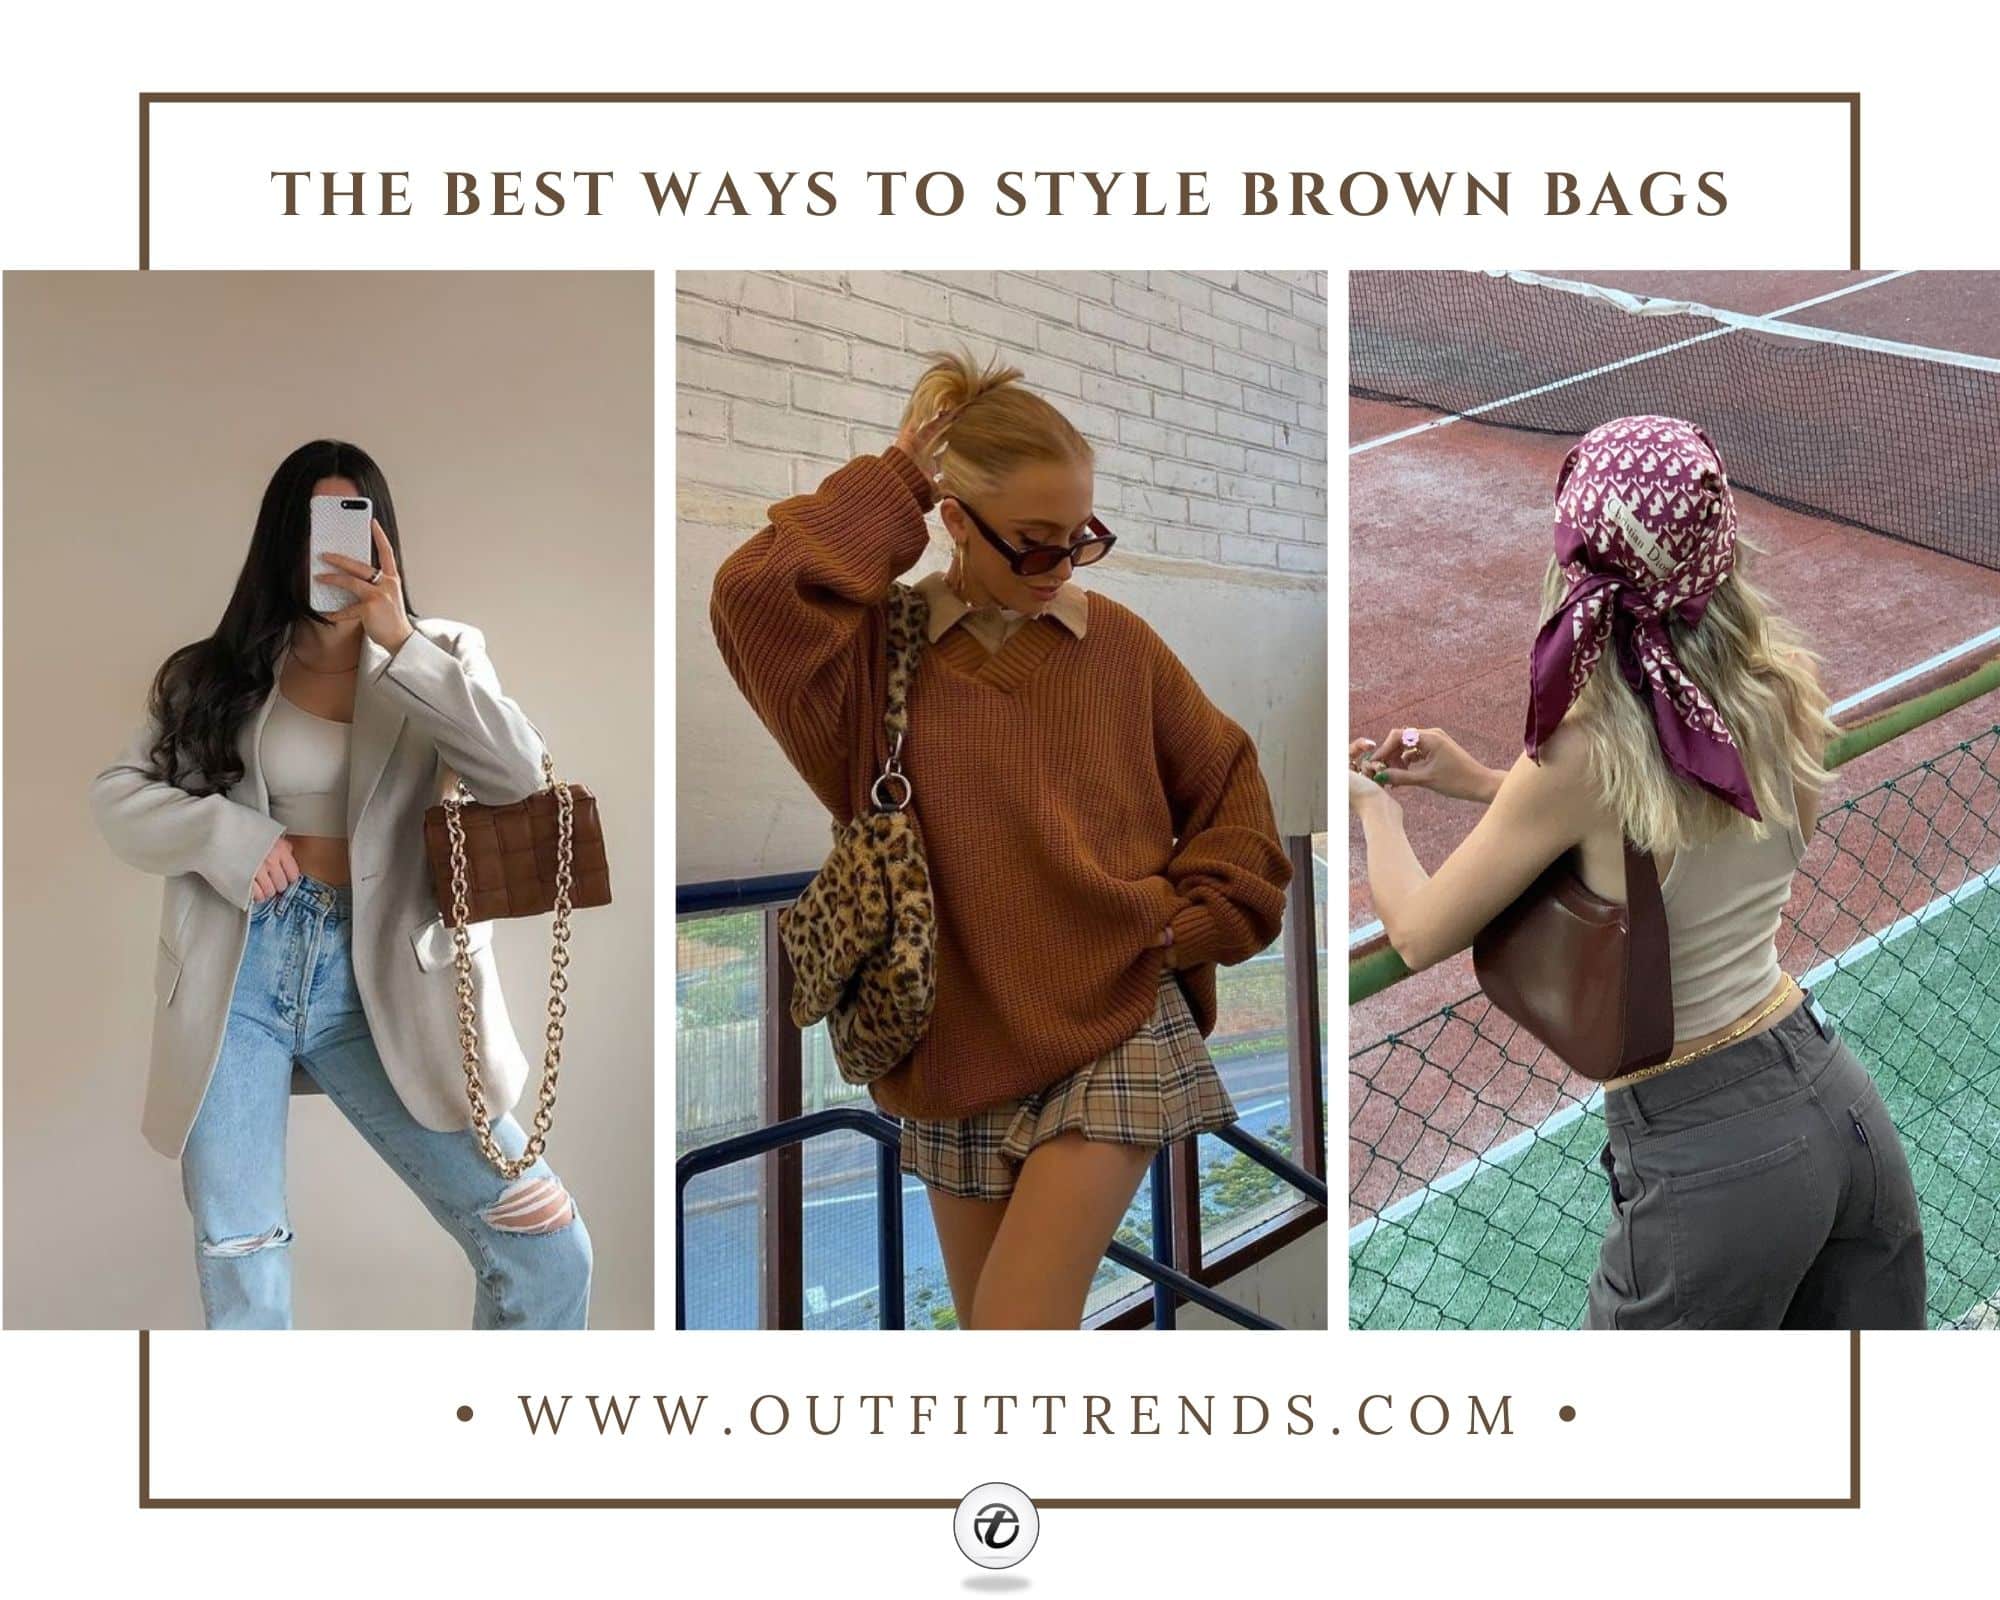 BROWN BAG LADY, HOW TO STYLE A BROWN BAG, BROWN BAG OUTFITS, BROWN BAGS